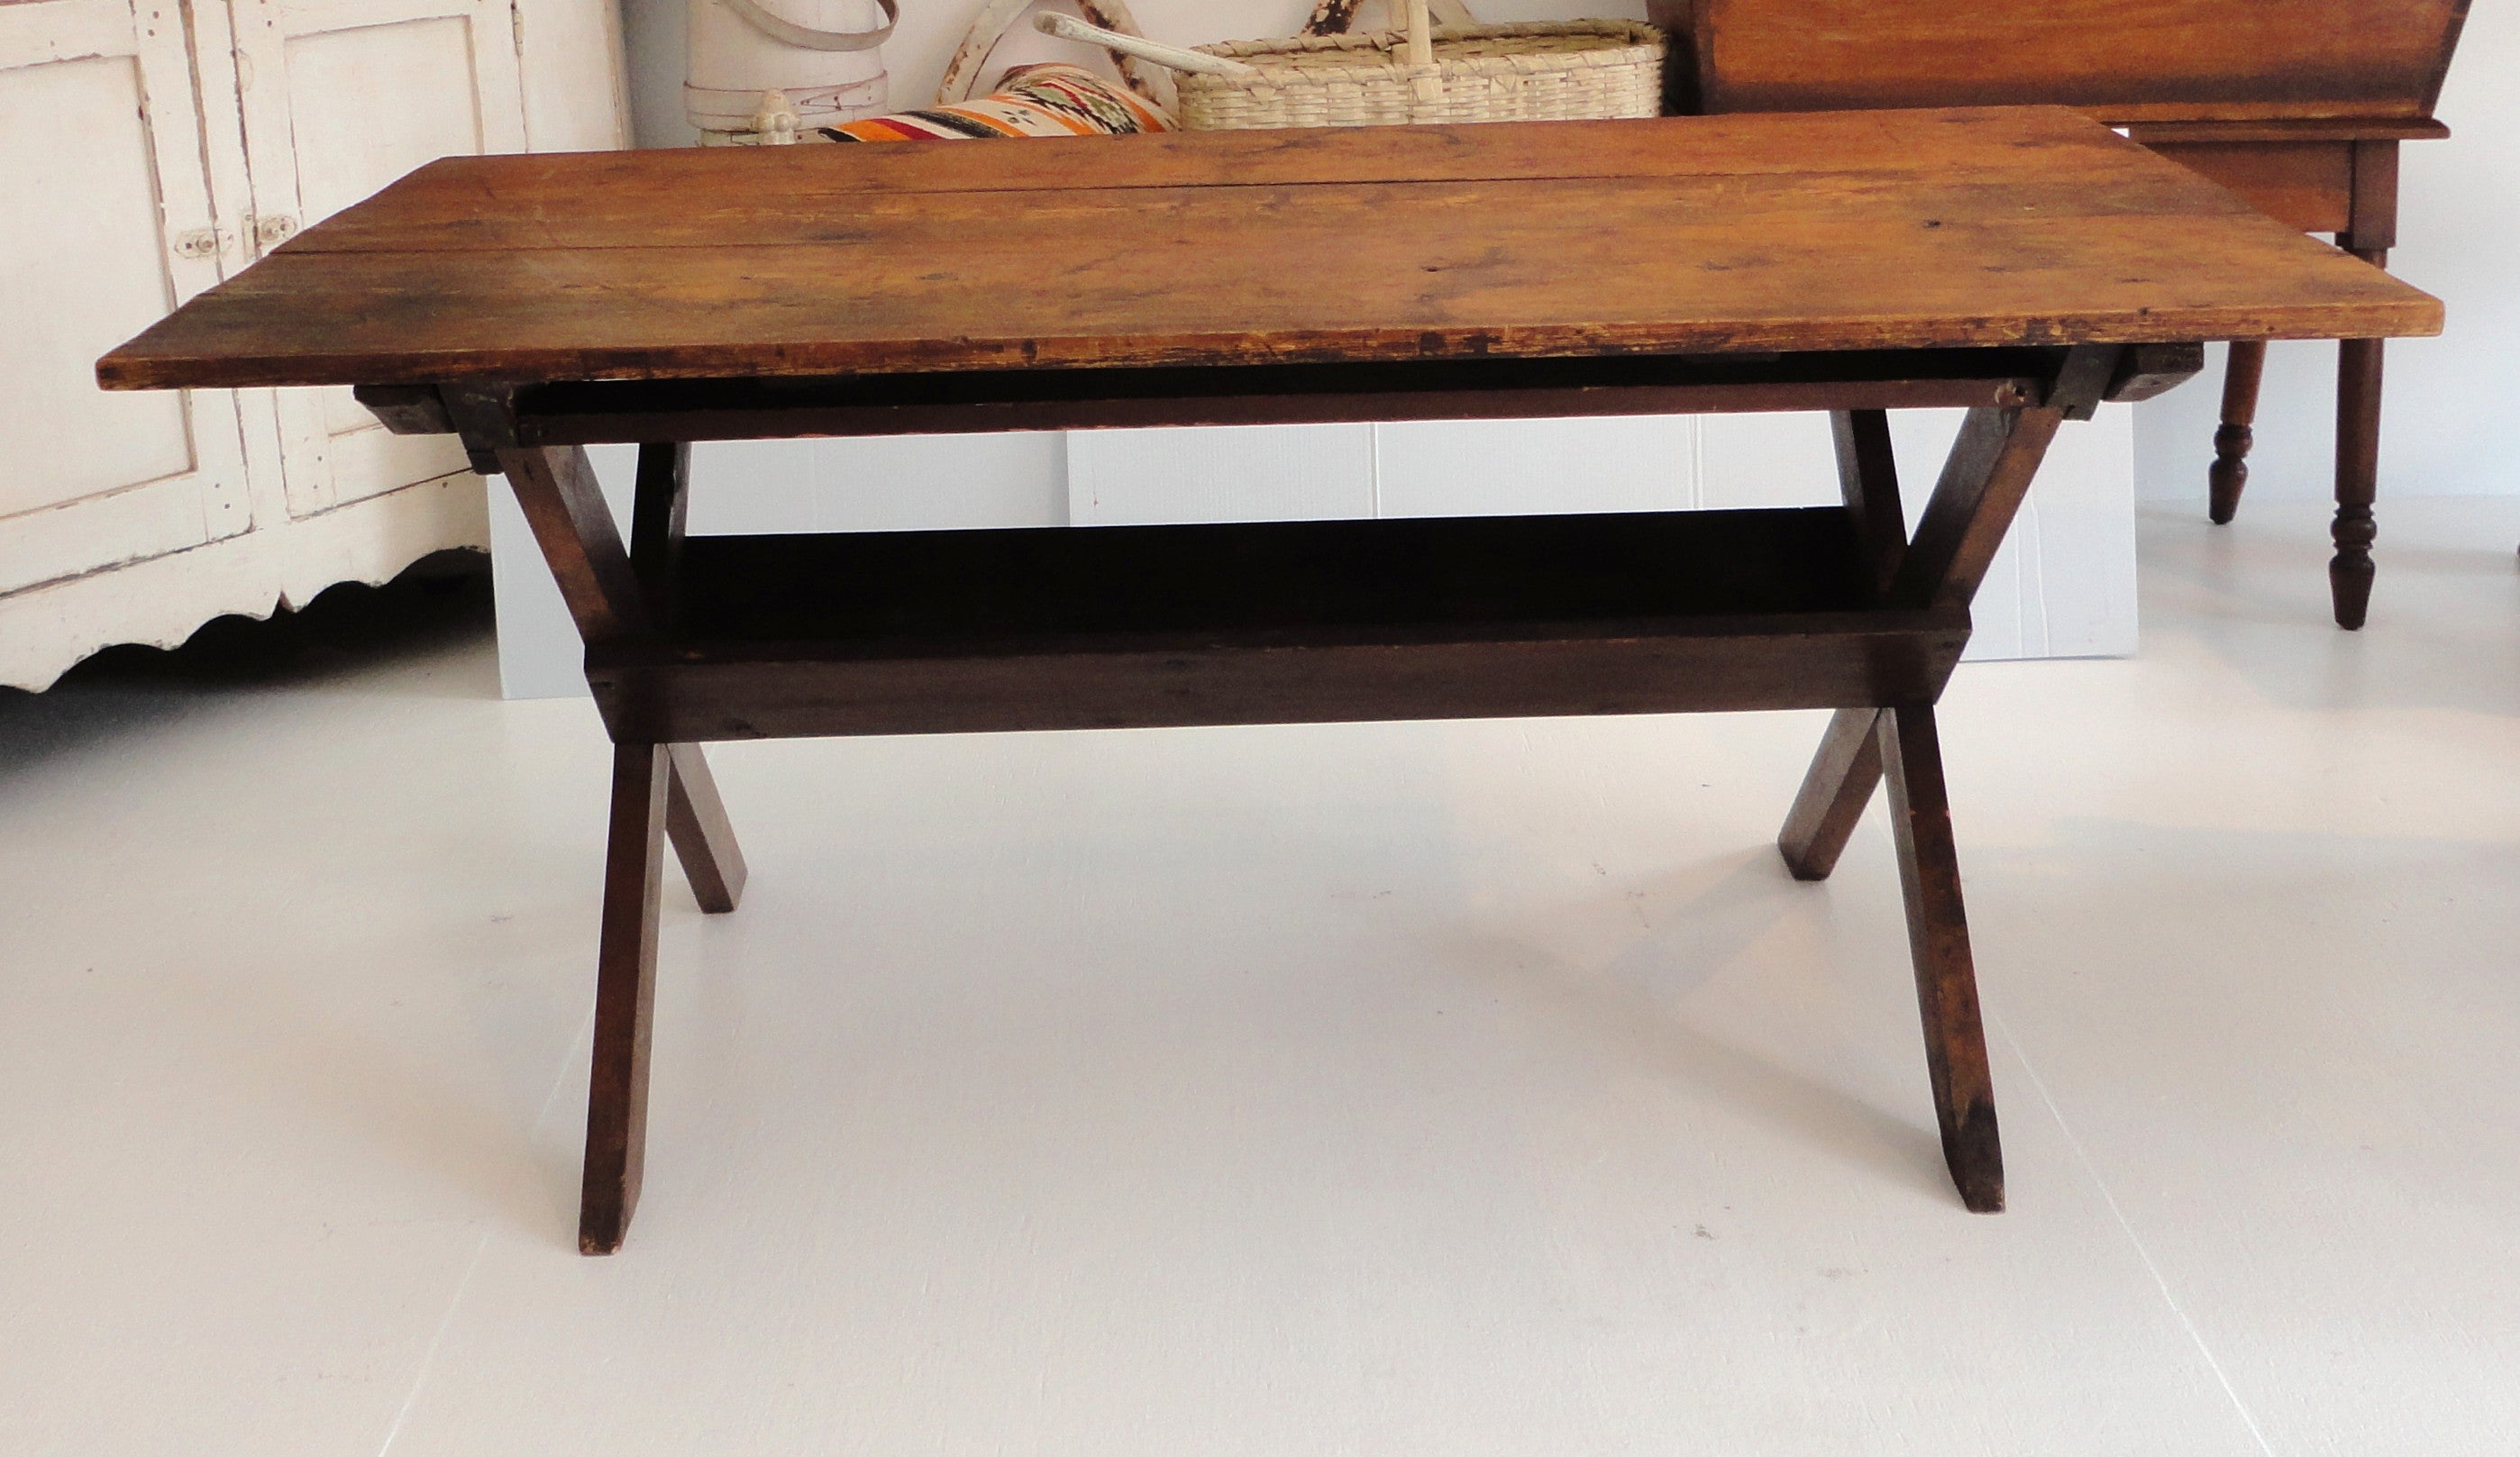 Fantastic 19thc Large New England  Sawbuck Table in  Natural Old Surface